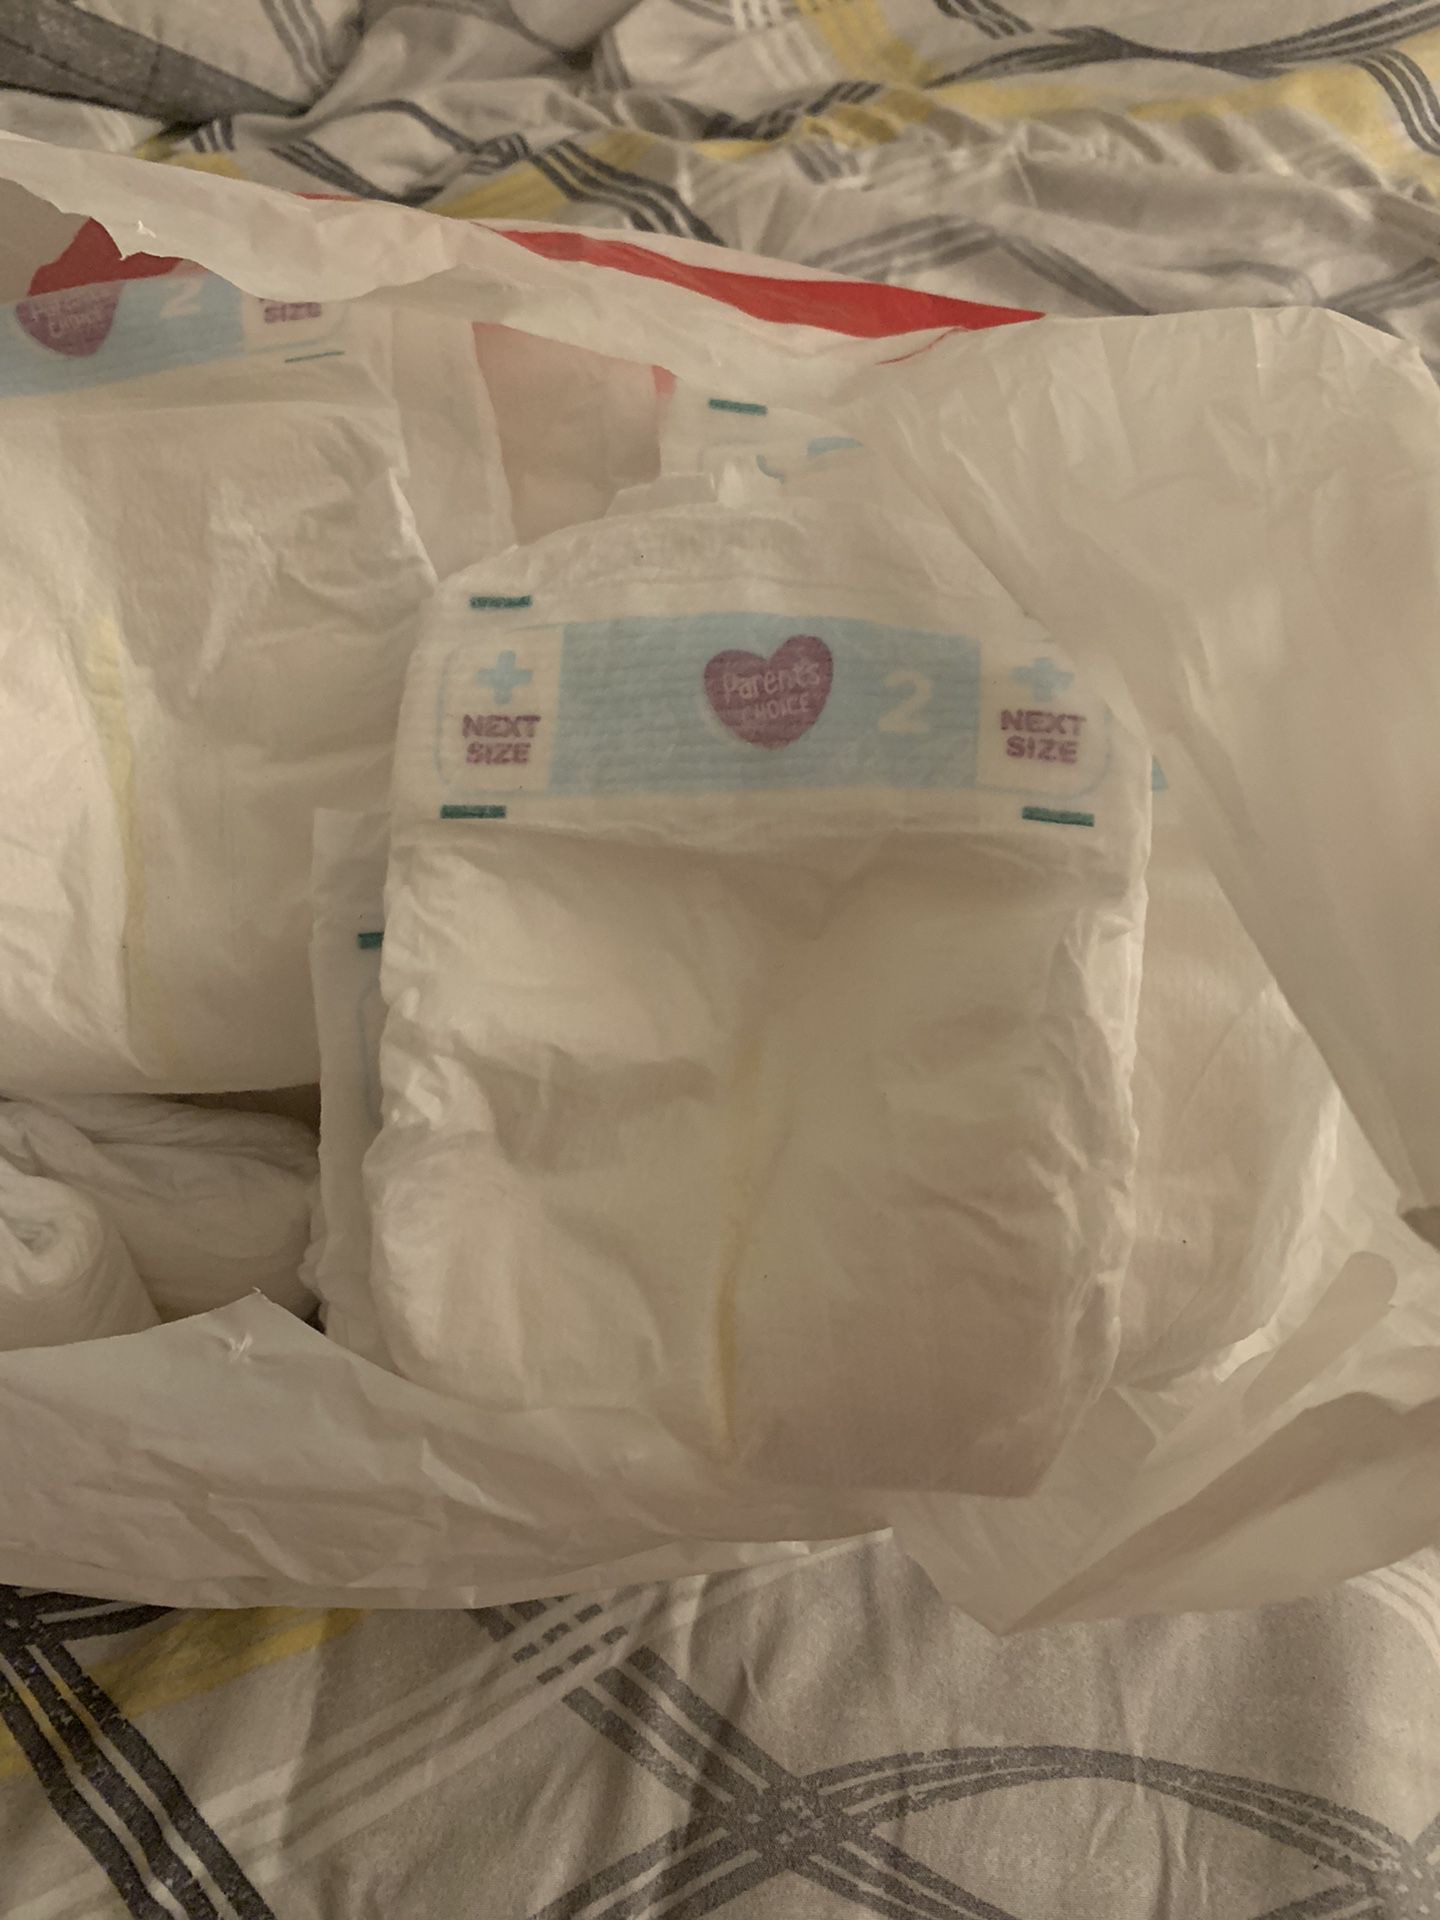 Free Size 2 Diapers